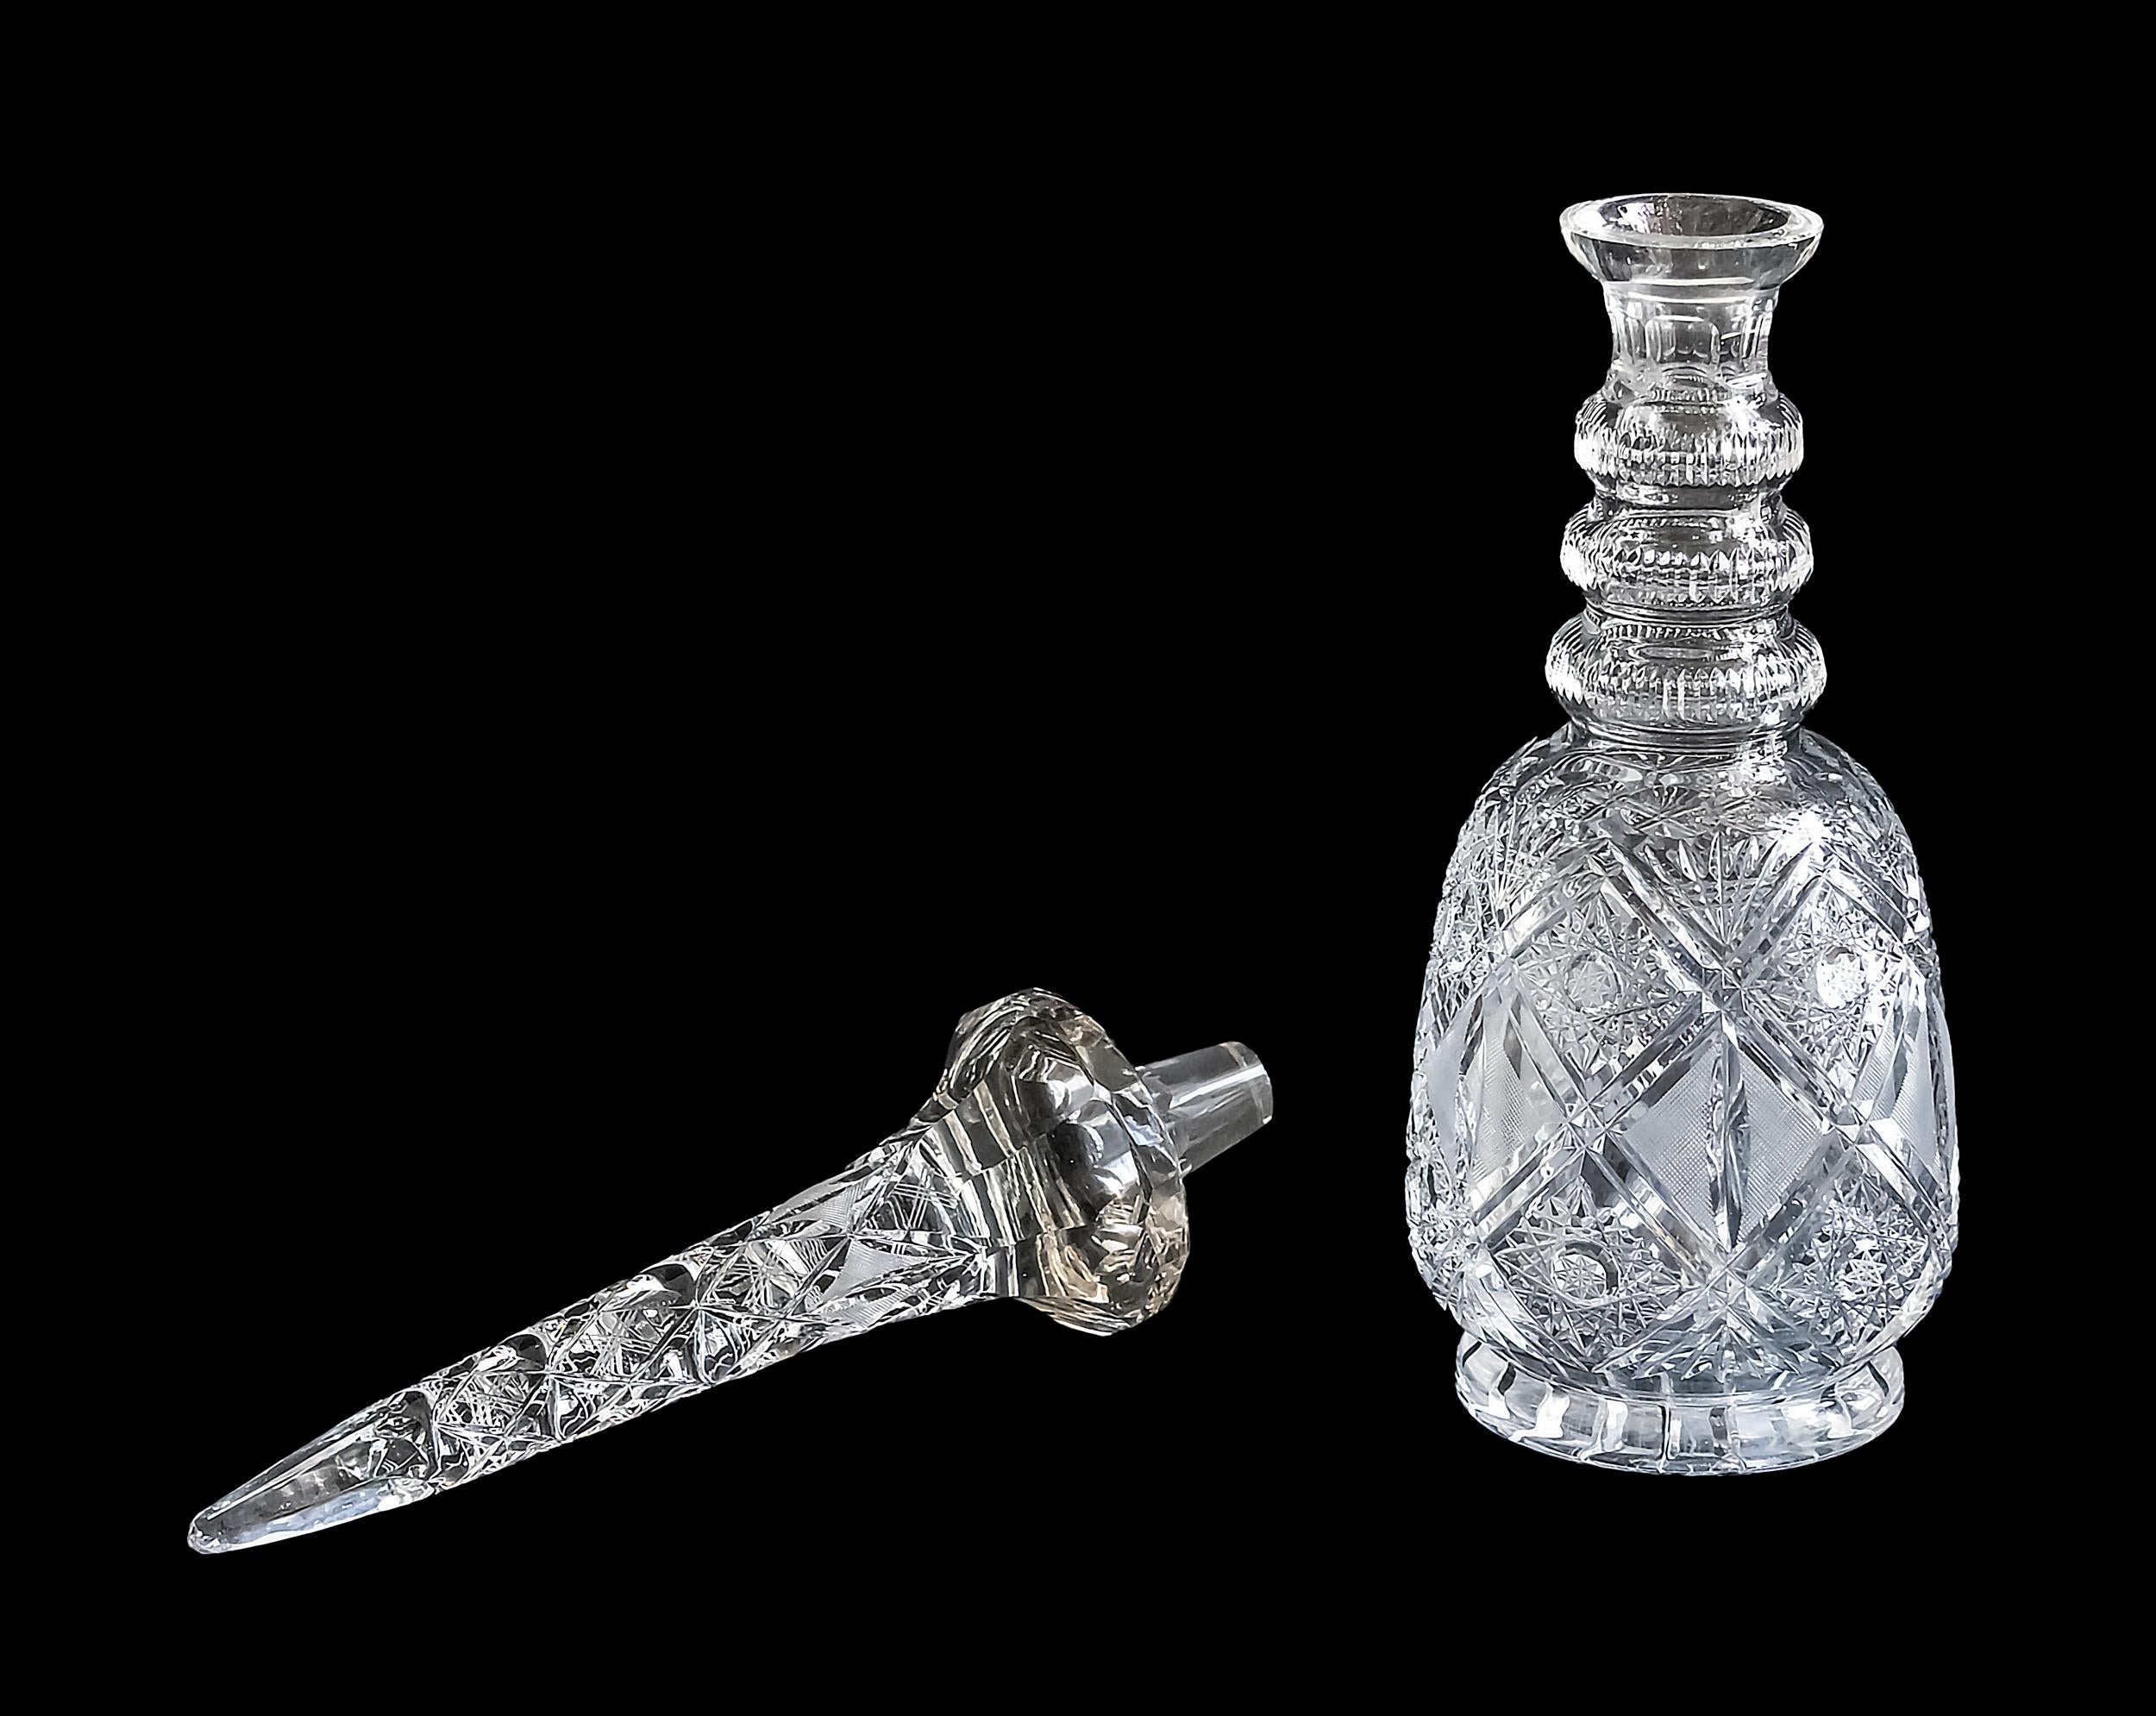 Extra large Bohemian Persian style hand cut crystal decanter.
Excellent vintage condition.